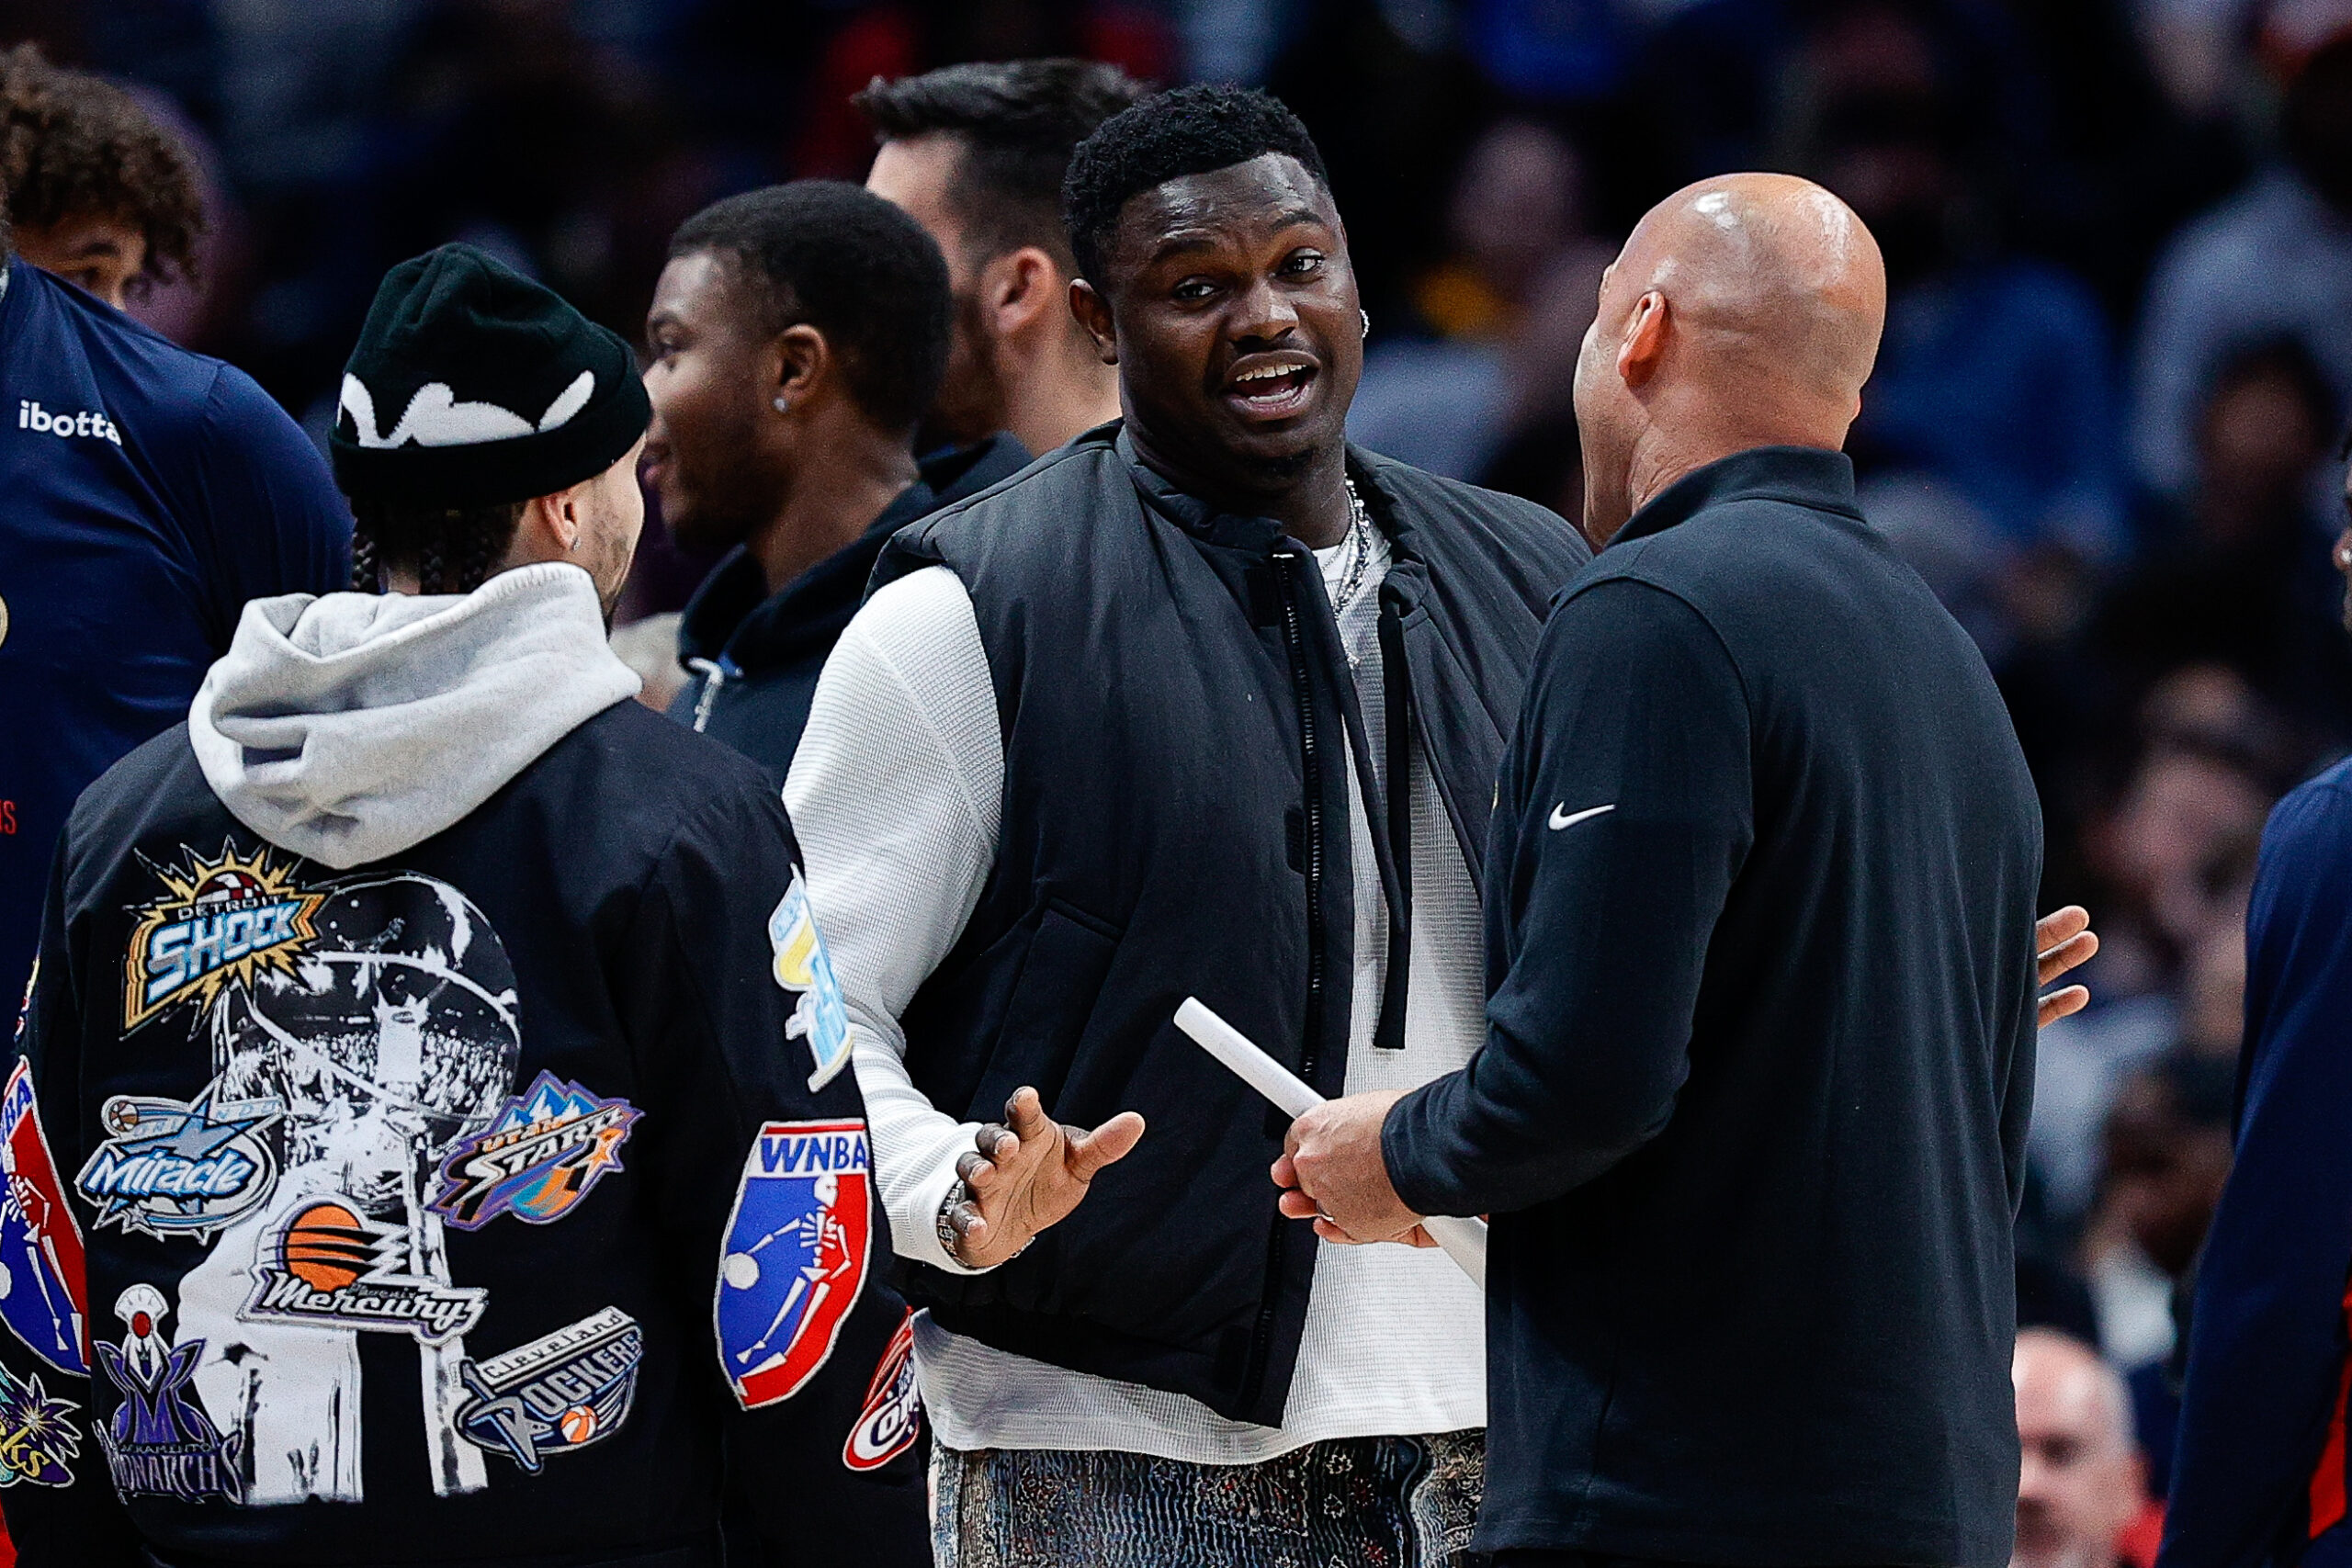 Zion Williamson to Return to Action When He ‘Feels Like Zion’